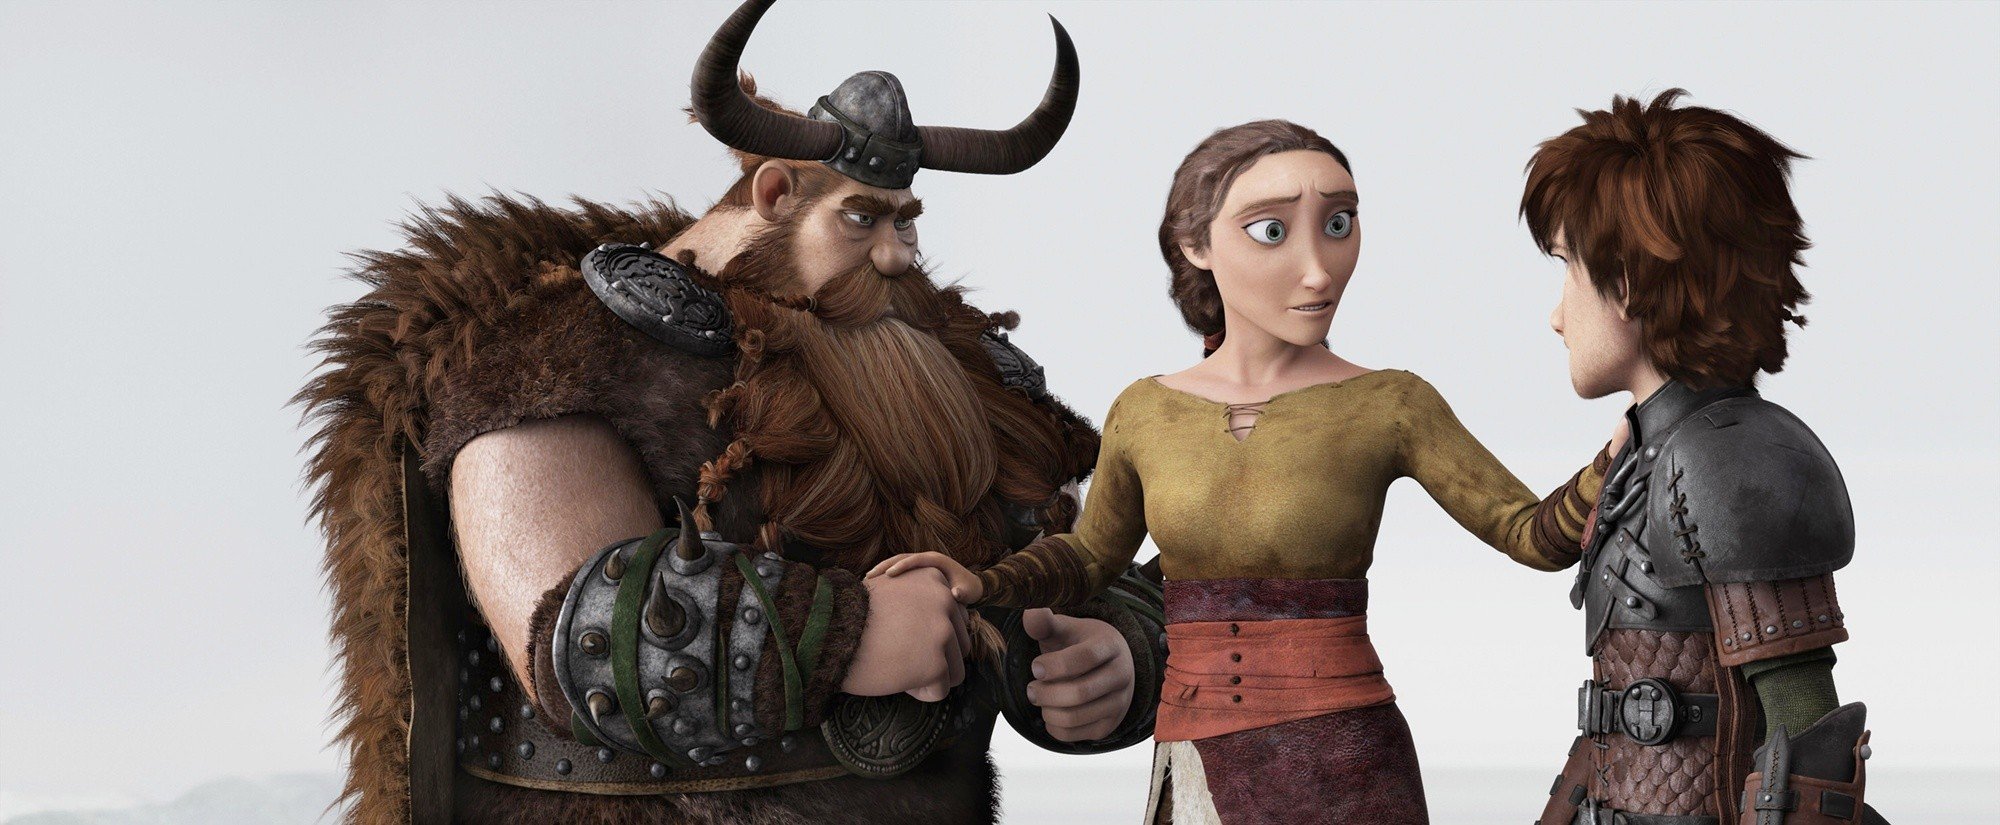 Stoick, Valka and Hiccup from 20th Century Fox's How to Train Your Dragon 2 (2014)